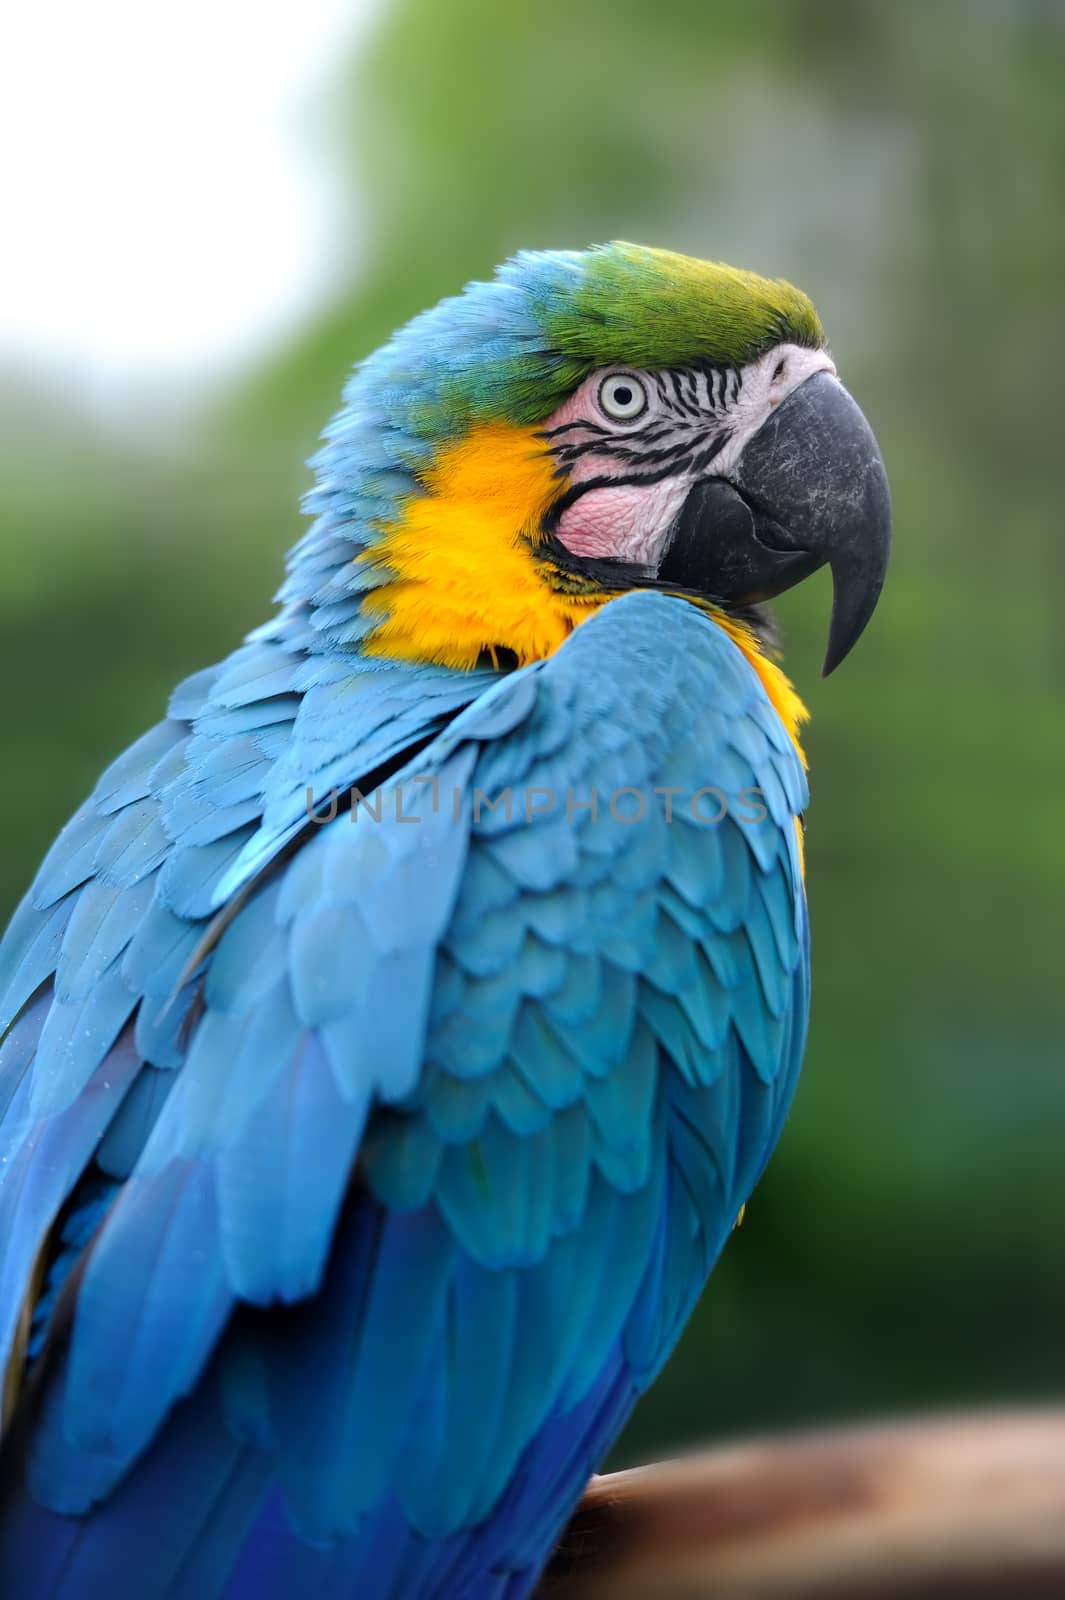 Parrot bird (Severe Macaw) sitting on the branch